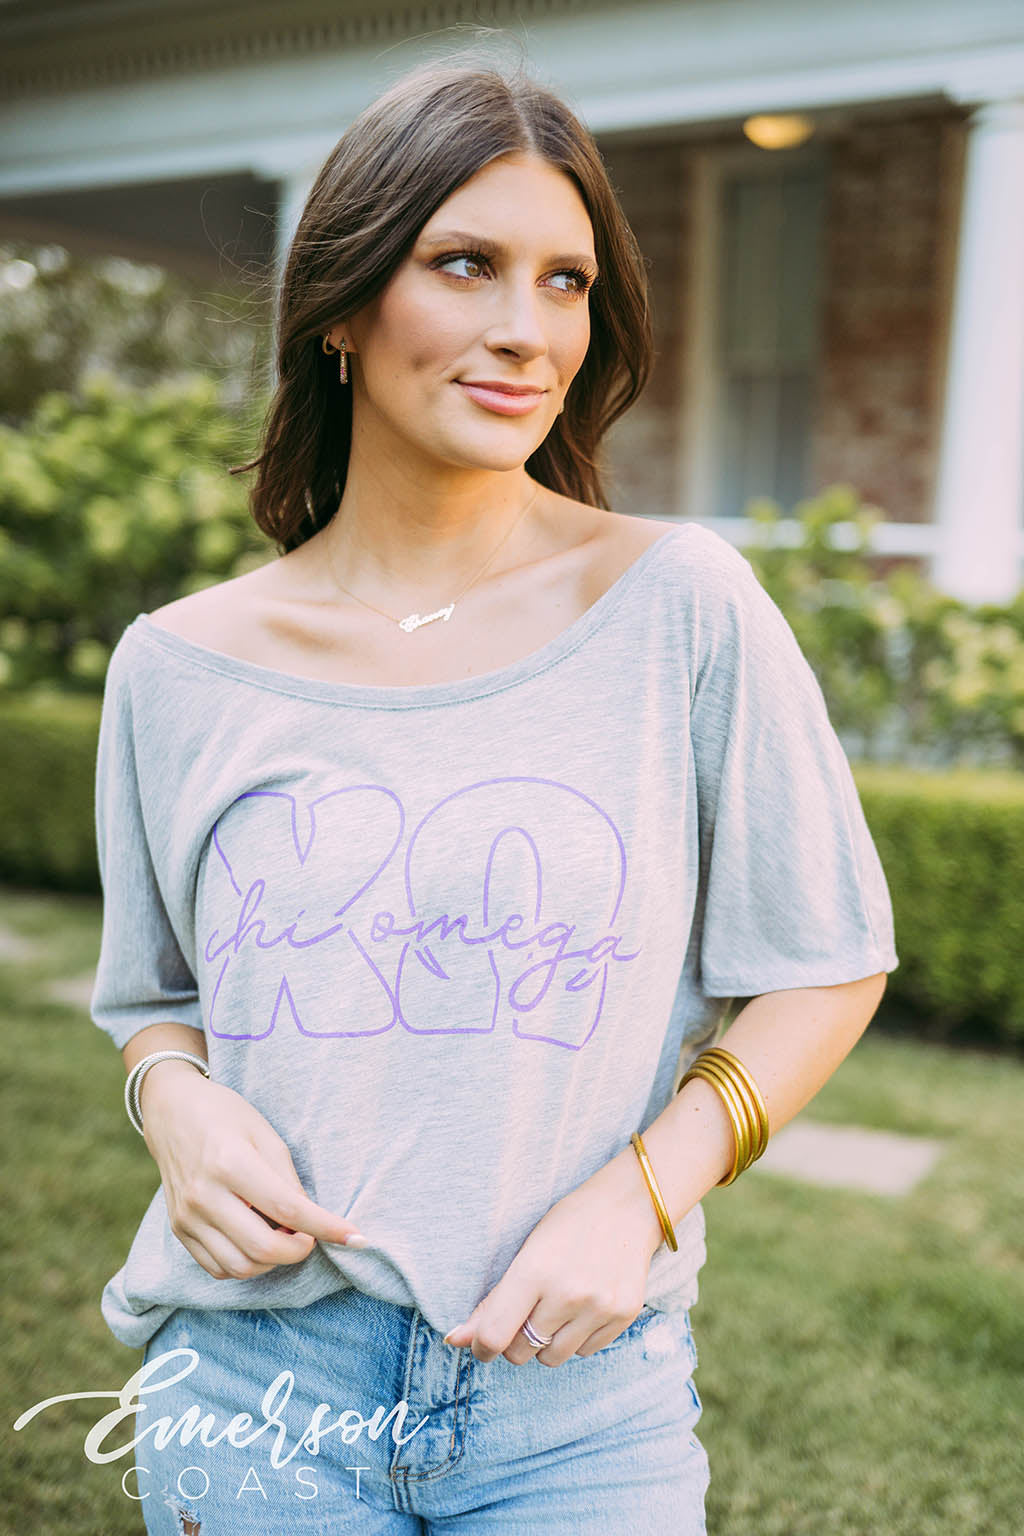 Chi Omega Recruitment Slouchy Tee